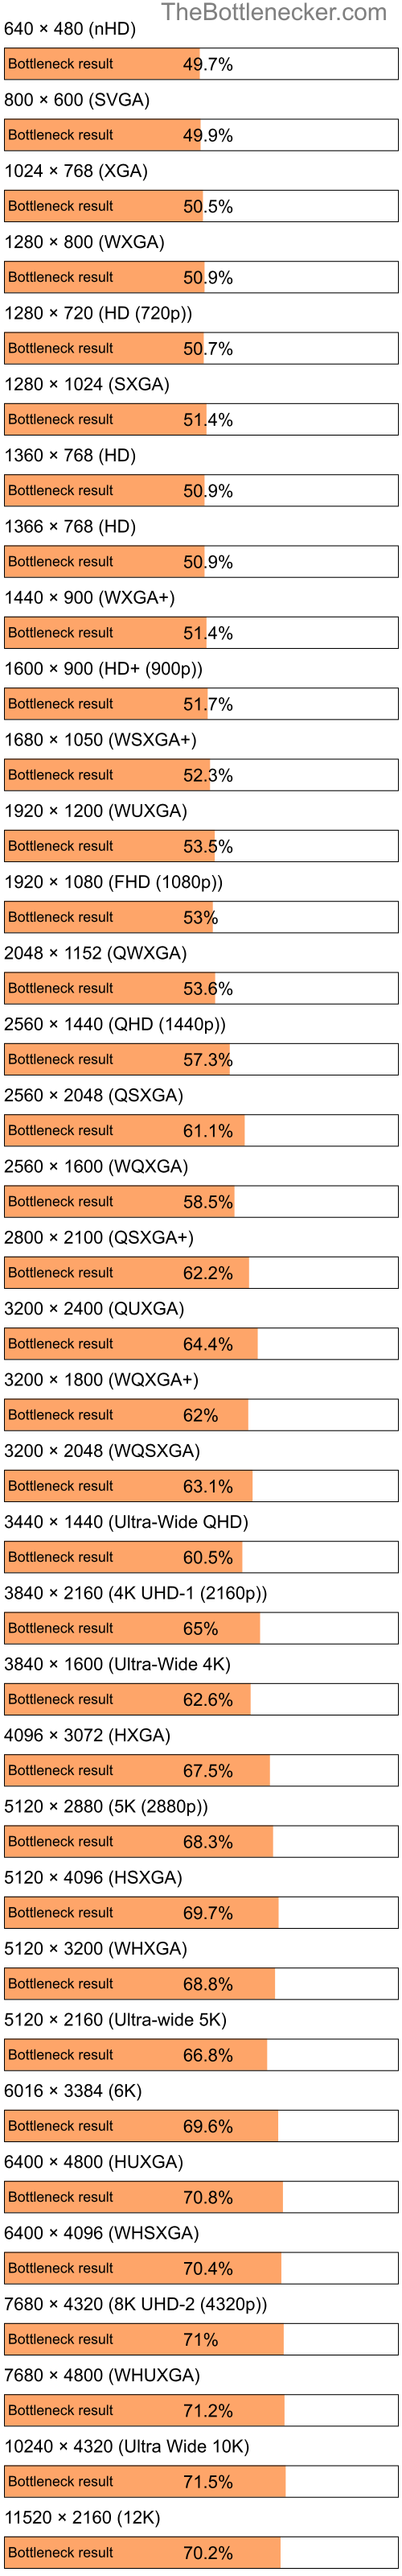 Bottleneck results by resolution for Intel Celeron and AMD Mobility Radeon HD 3430 in Processor Intense Tasks